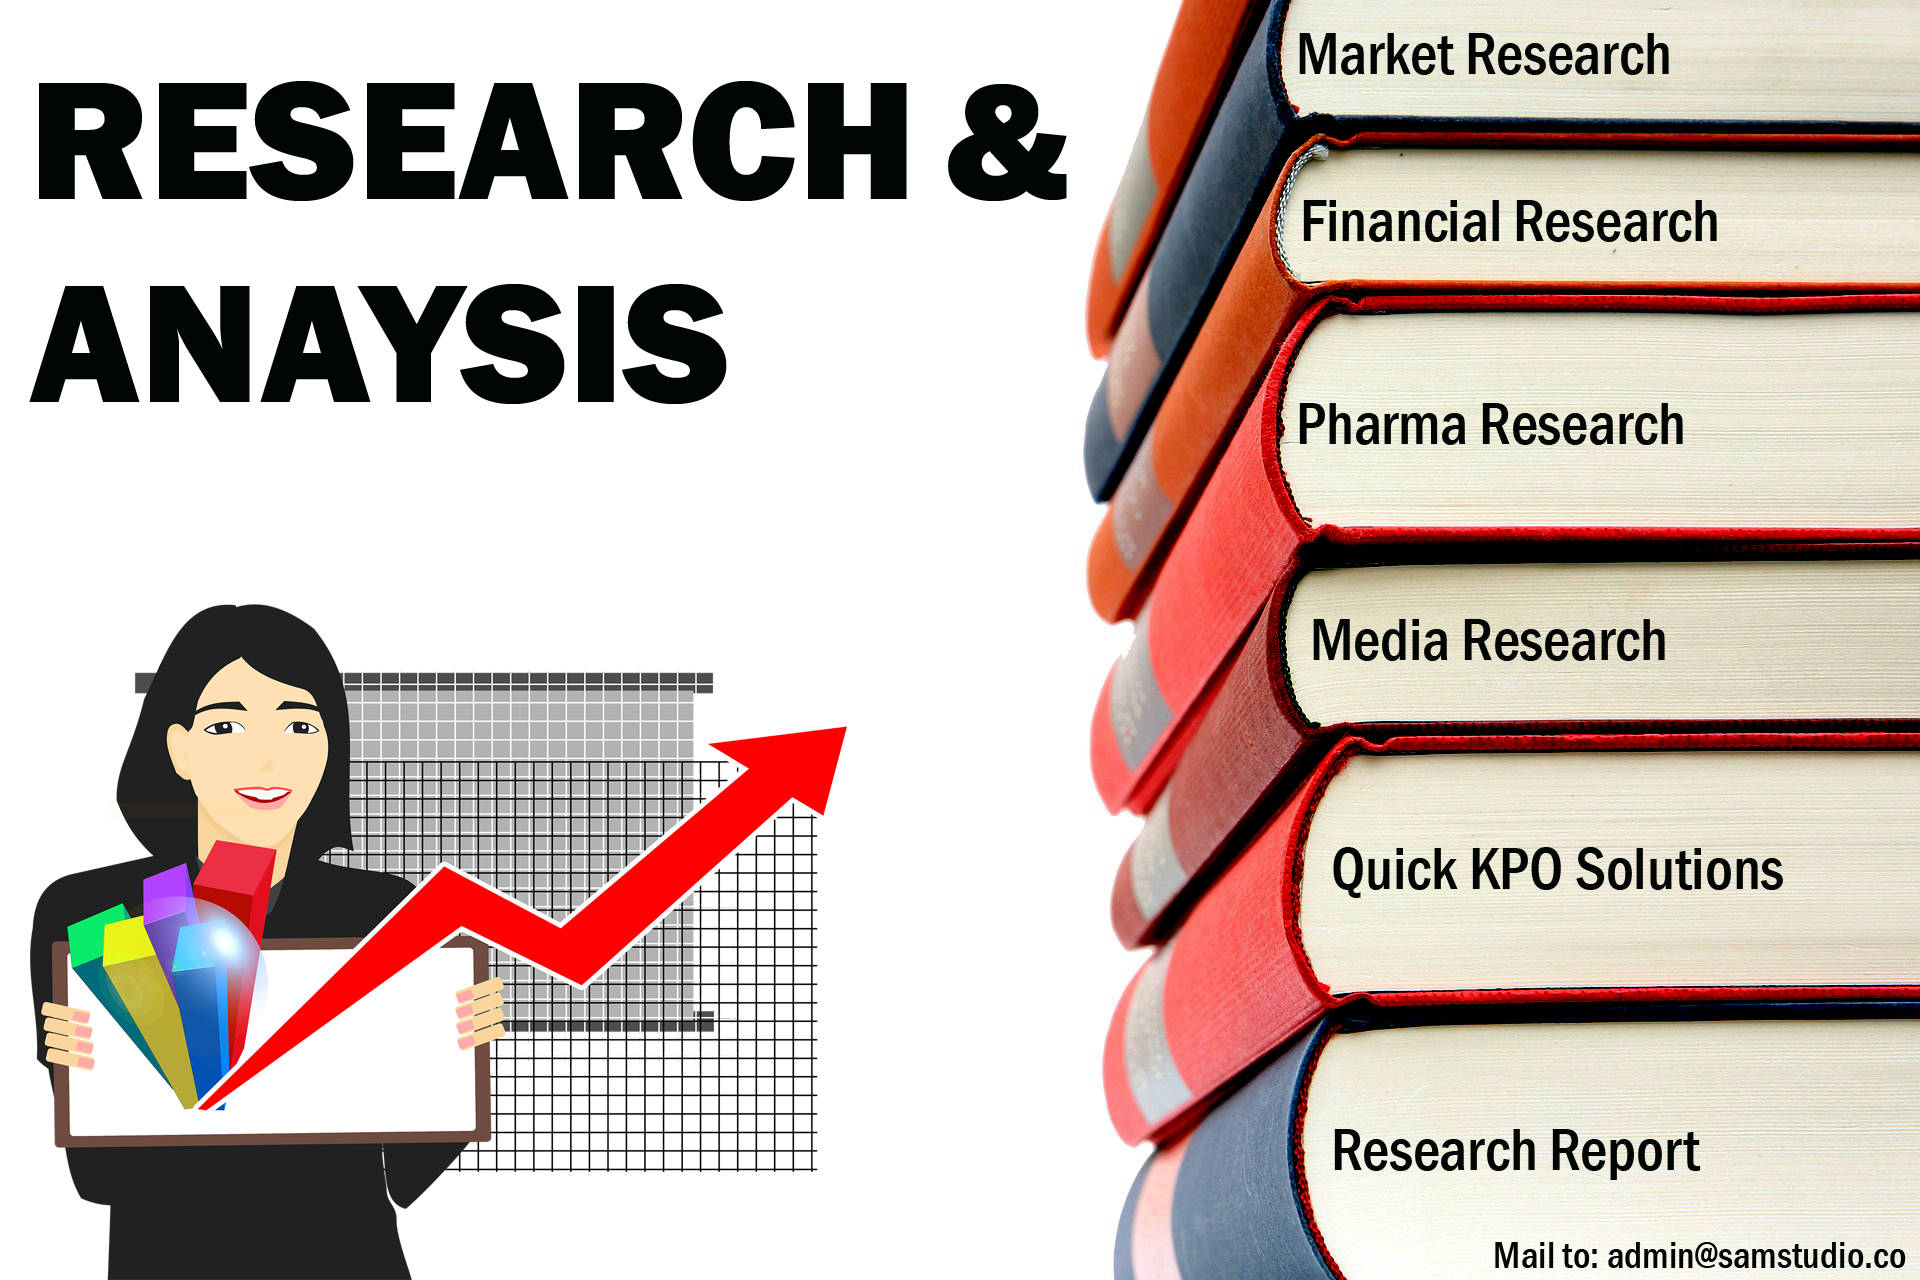 Research and analysis services